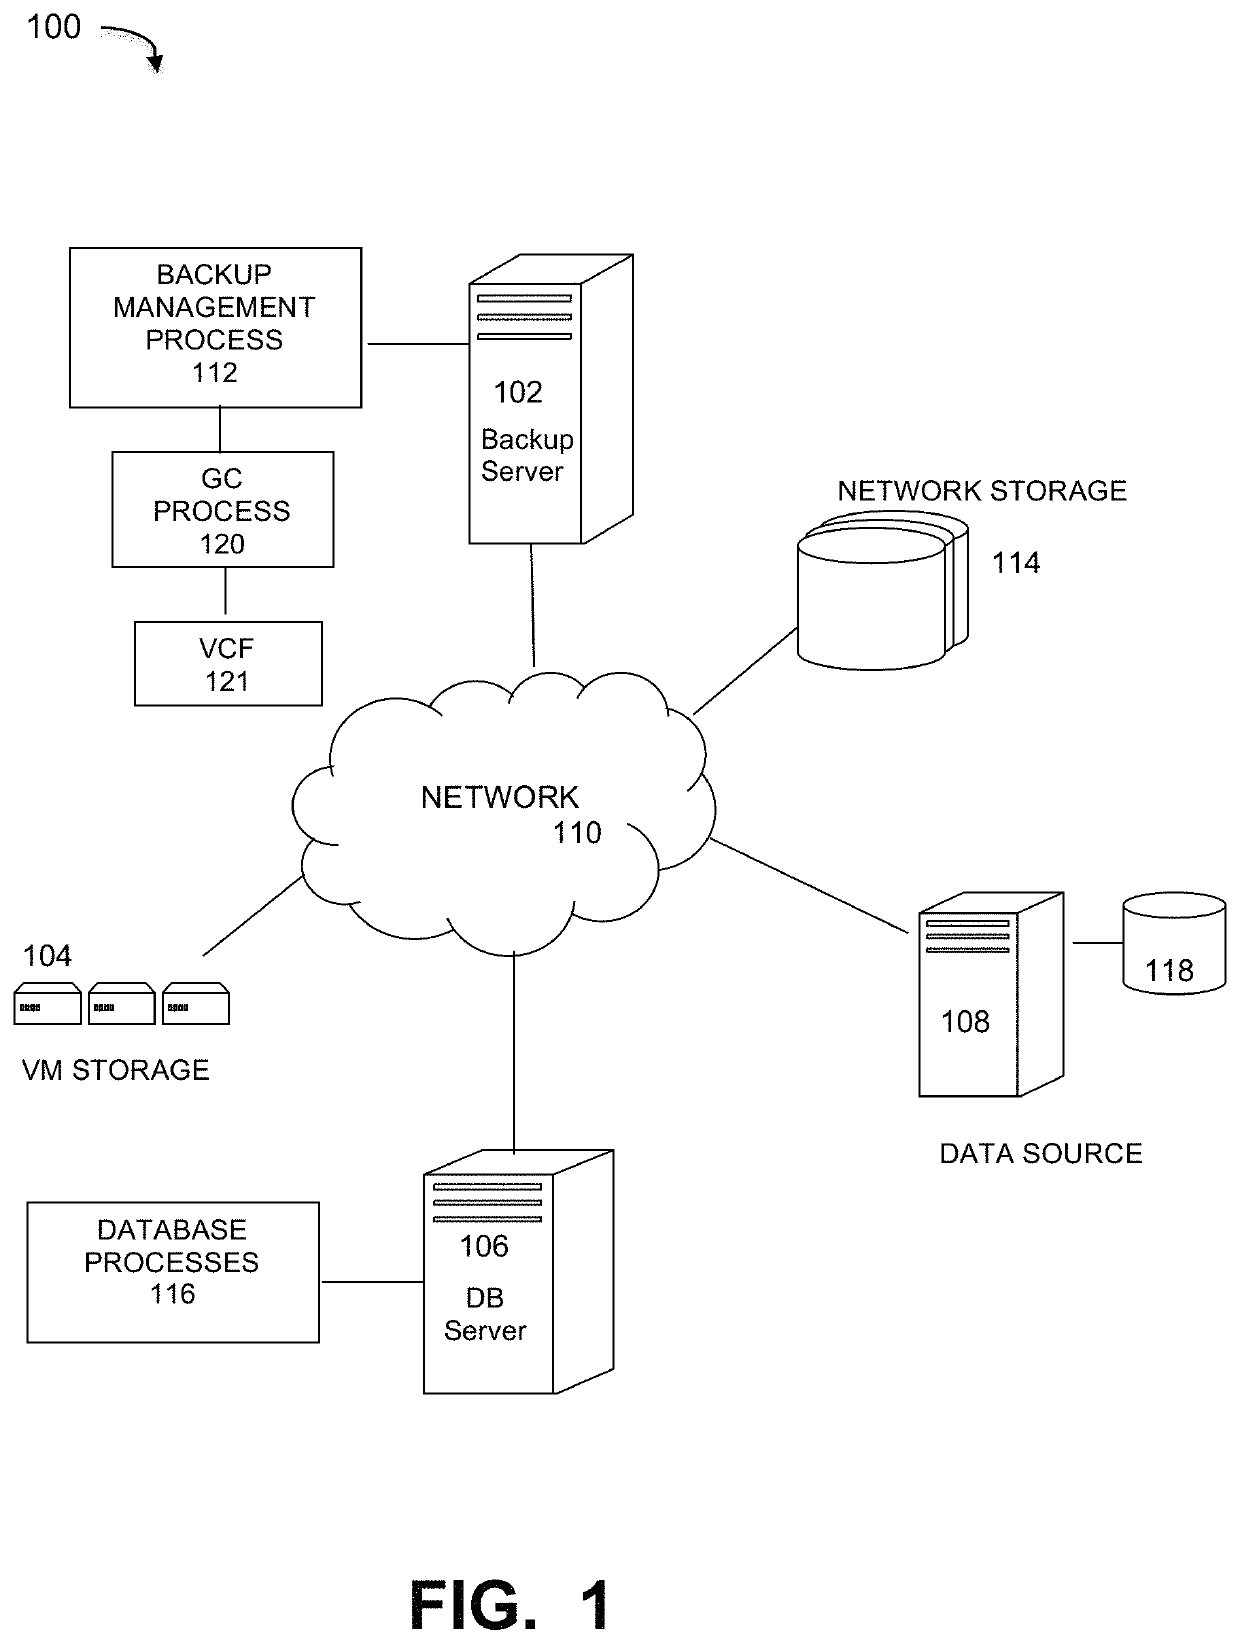 Virtual copy forward method and system for garbage collection in cloud computing networks